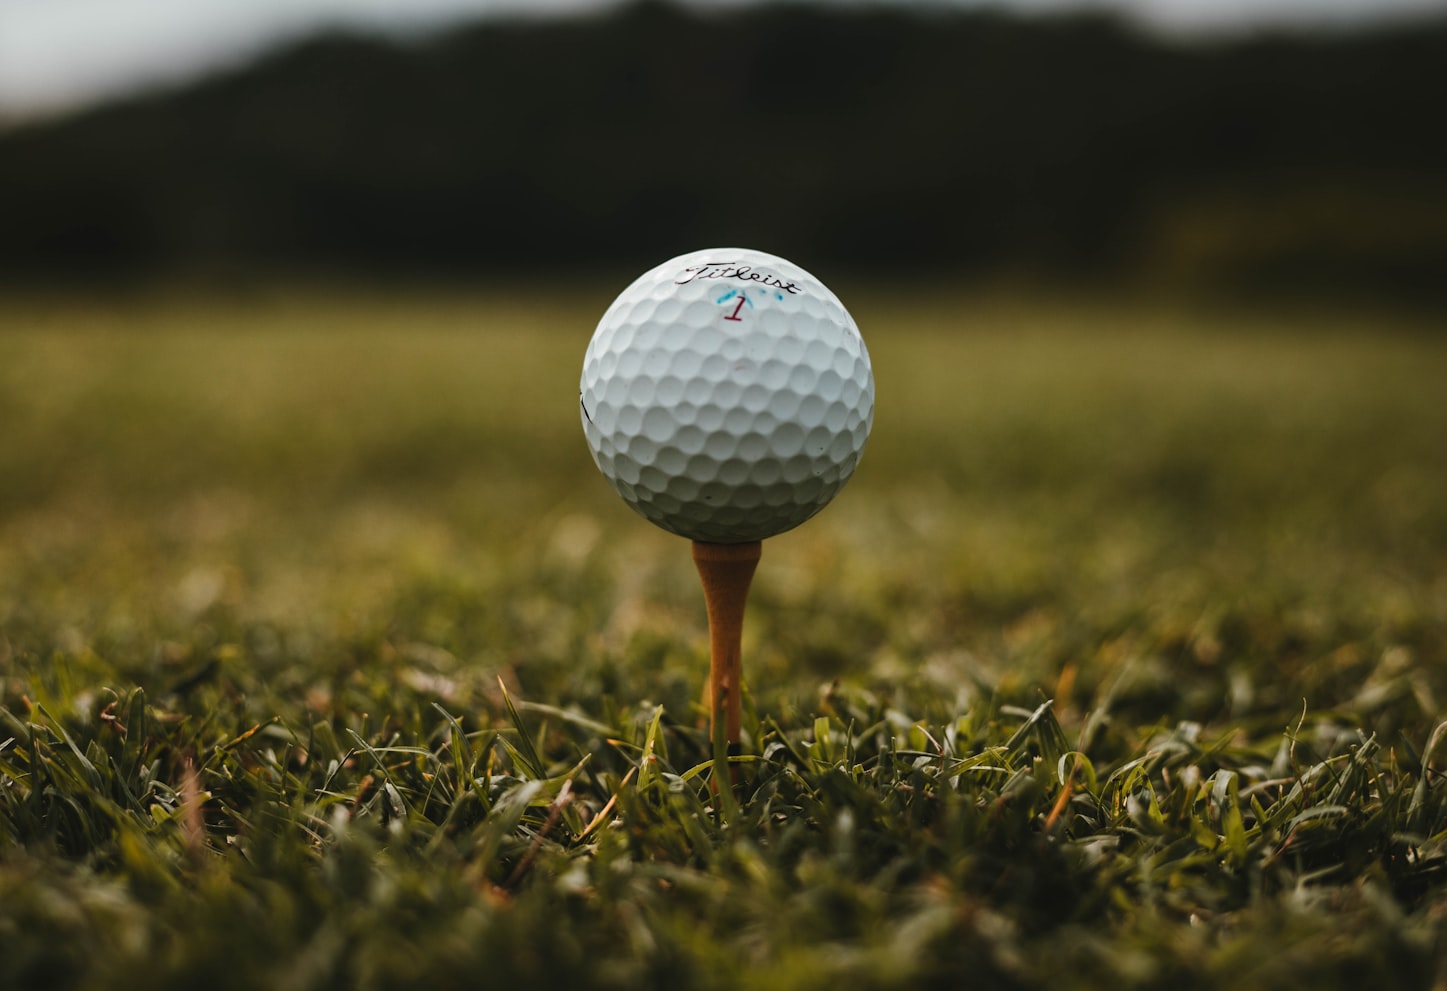 Top 10 Golf Ball For A Slice To Buy Online